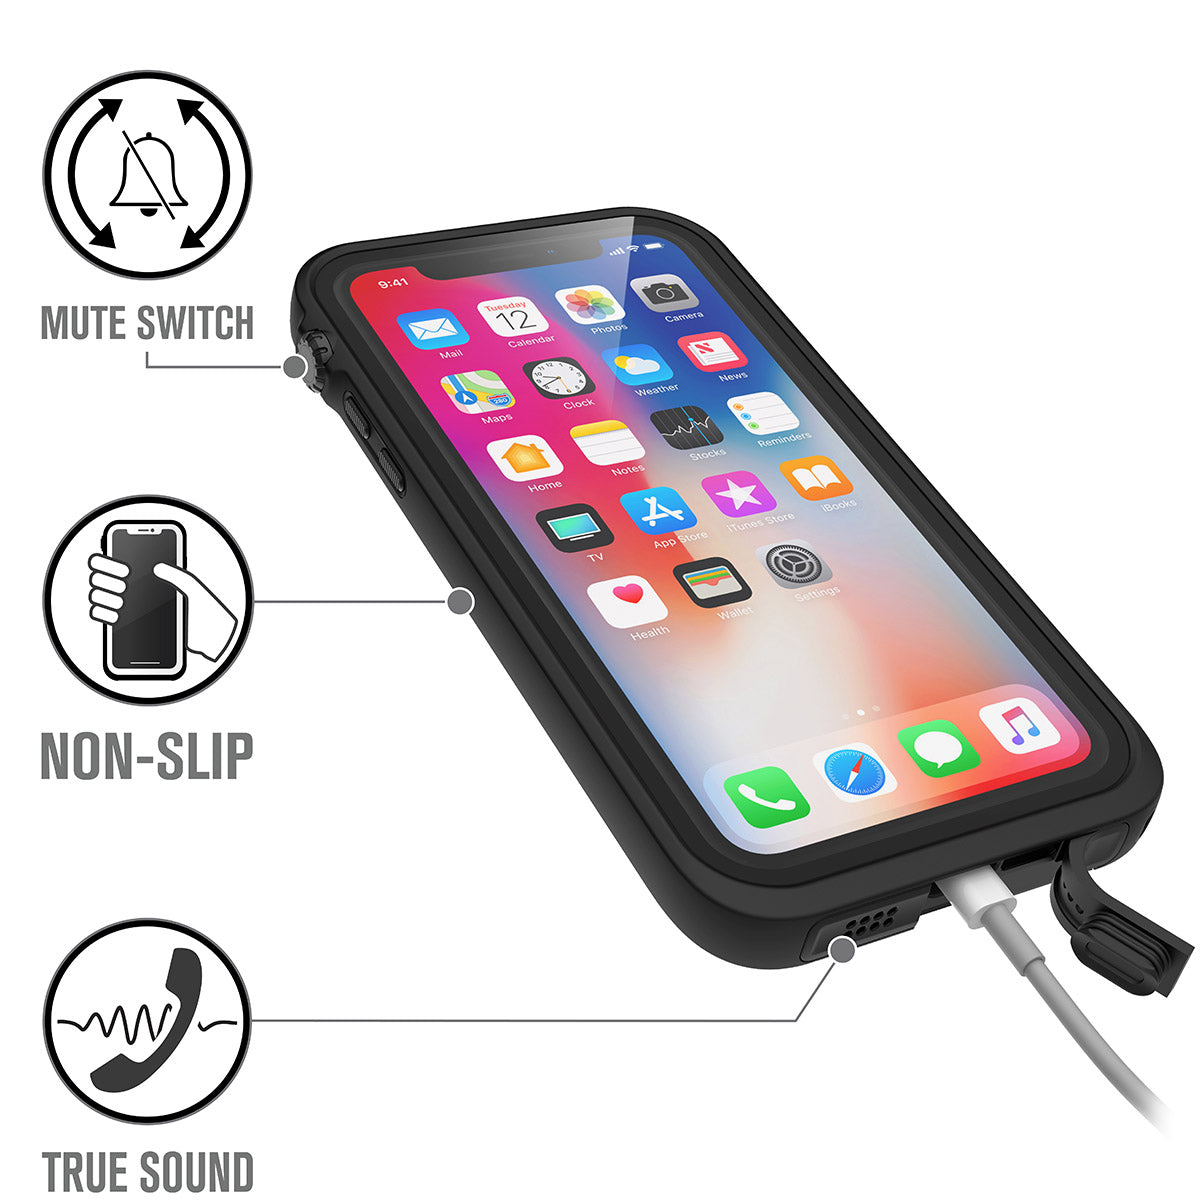 Catalyst iphone x/xr/xs/xs max waterproof case x showing the case features in stealth black text reads mute switch non slip true sound